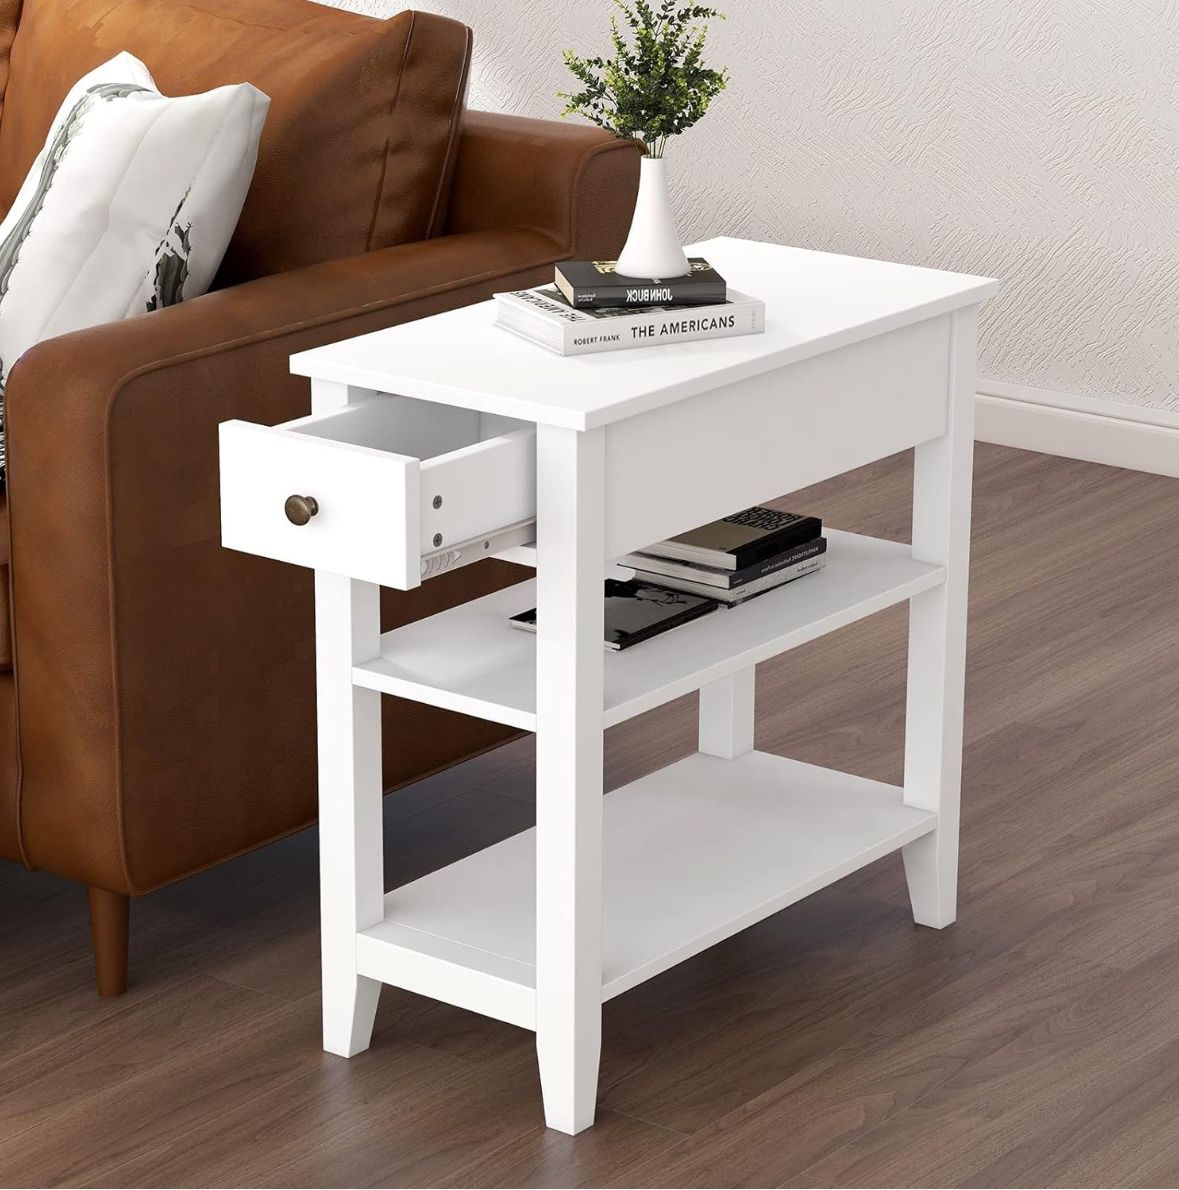 ChooChoo Side Table Living Room, Narrow End Table with Drawer and Shelf, 3-Tier Sofa End Table for Small Space, White